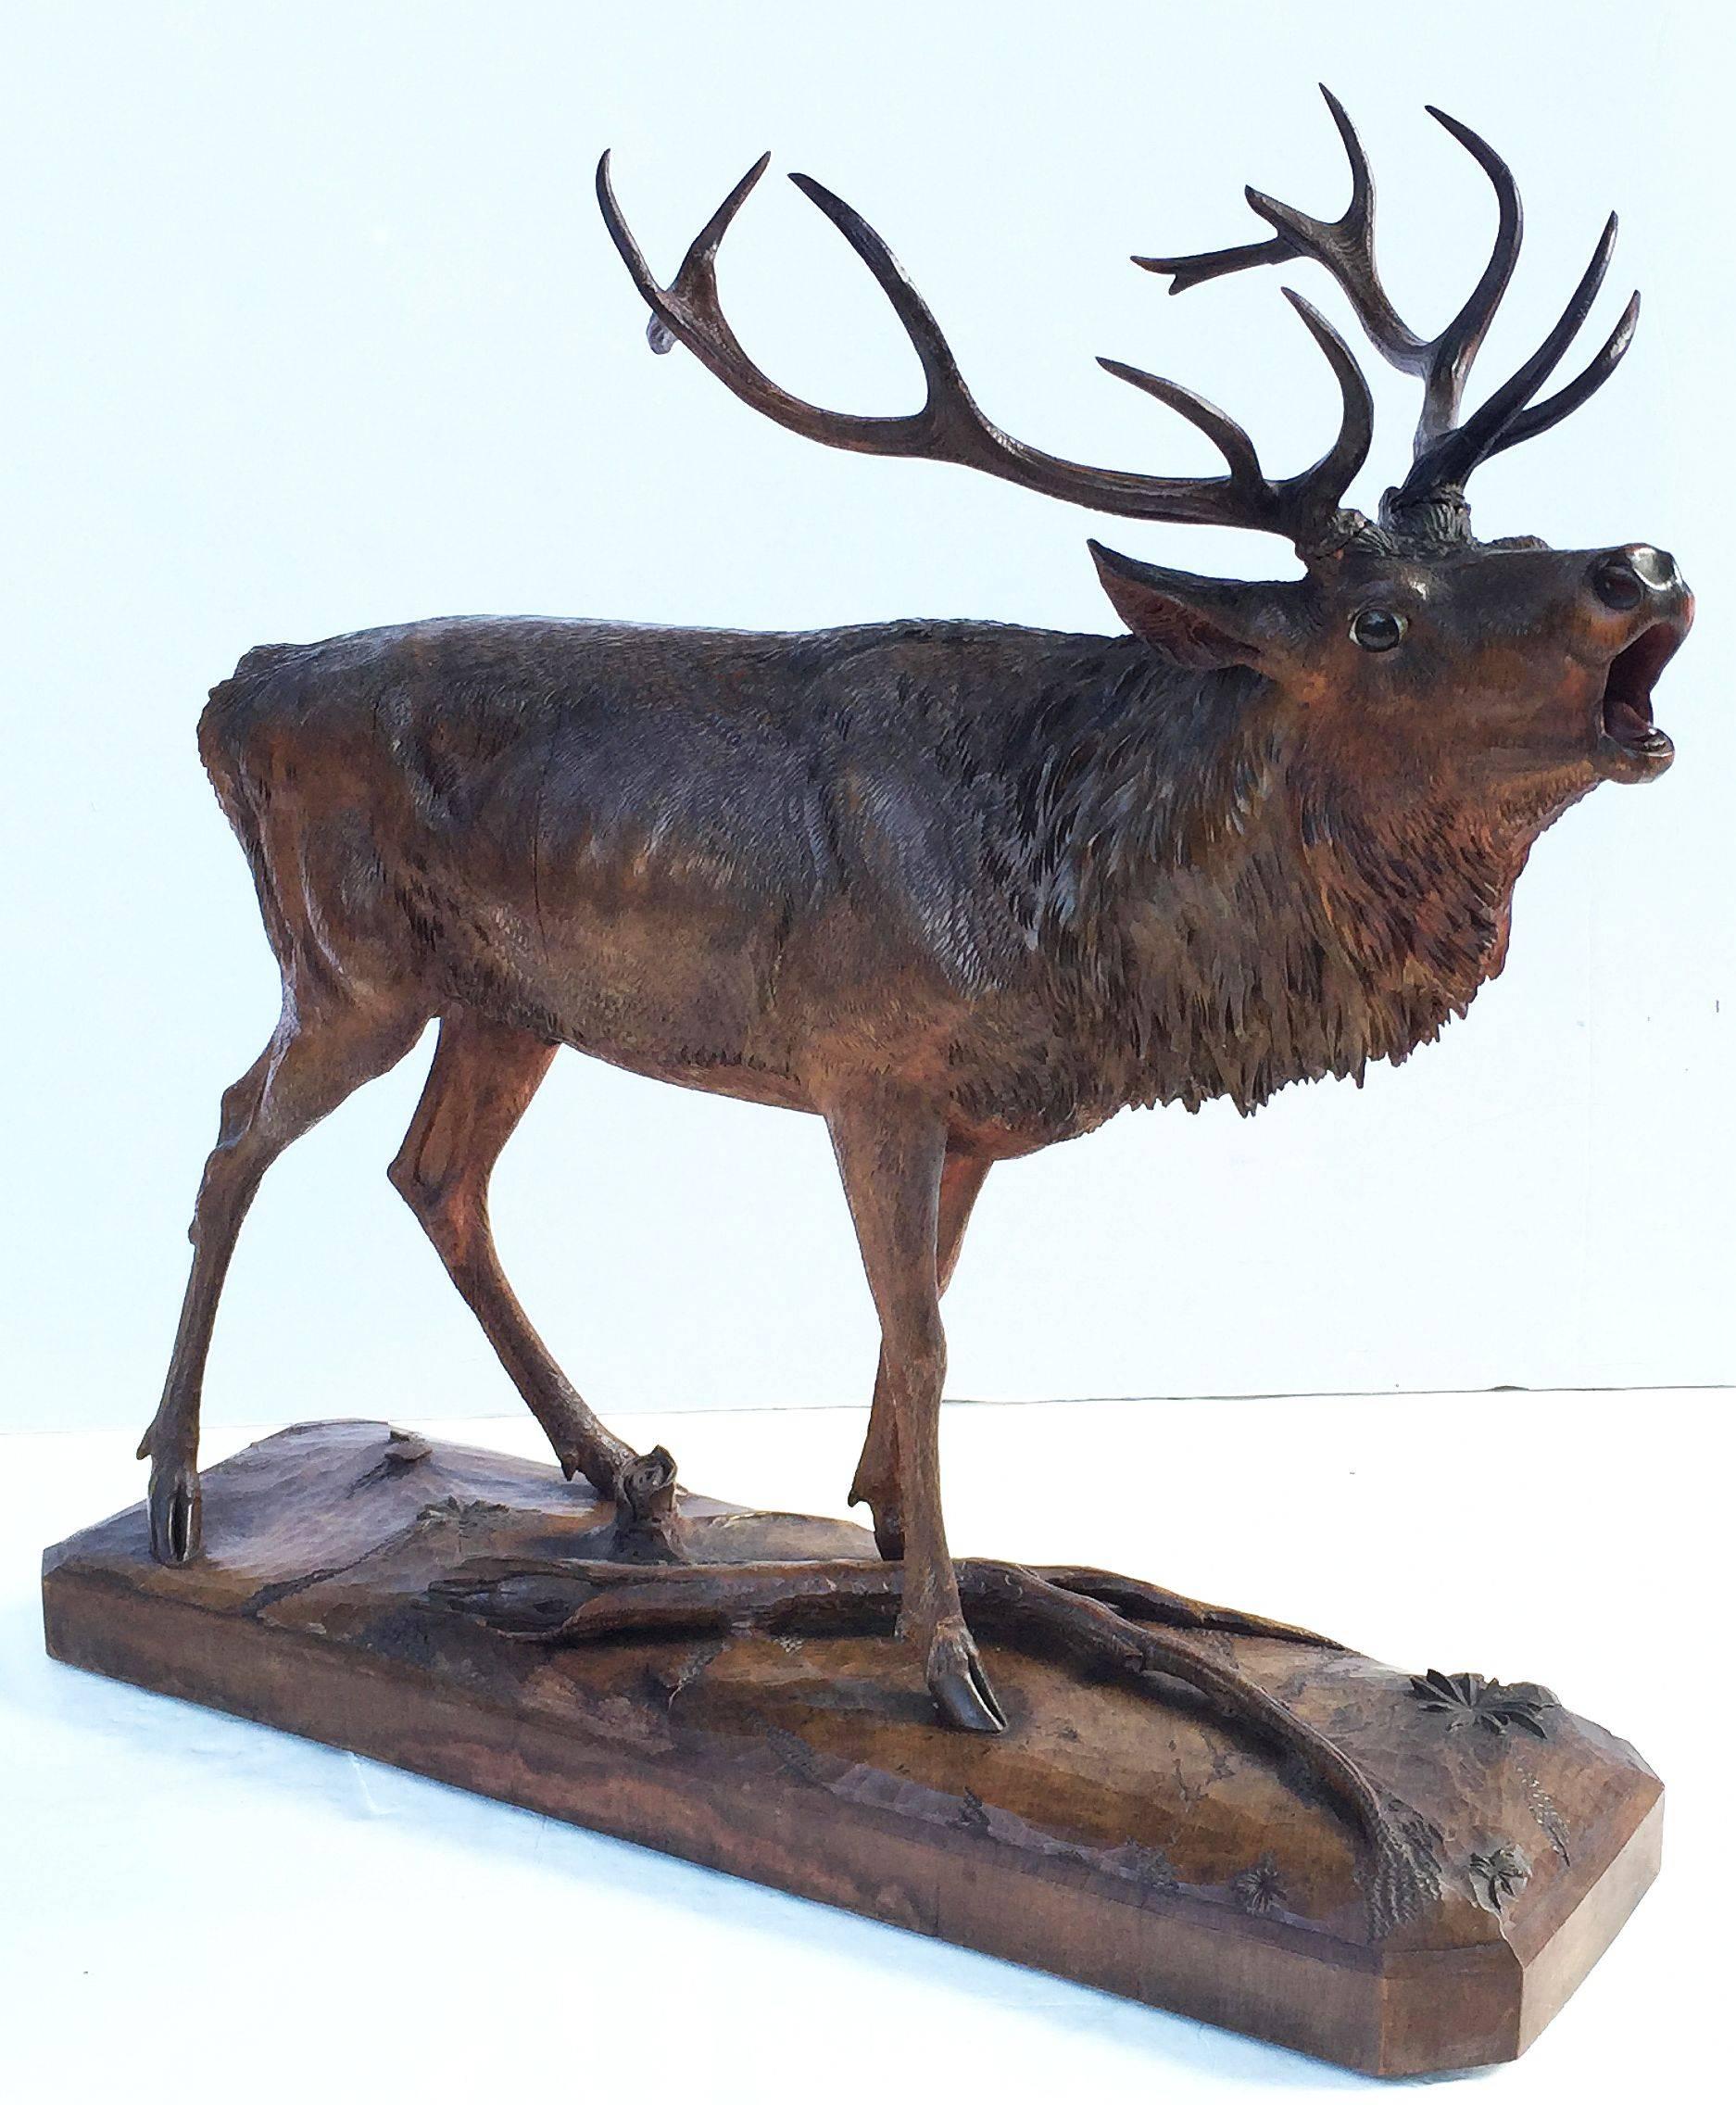 A large Black Forest deer or stag of carved wood, in a standing pose, on platform base. Featuring fine detail to the head, body and base. The head with naturalistic glass eyes and painted accents.

Antler horns removable for